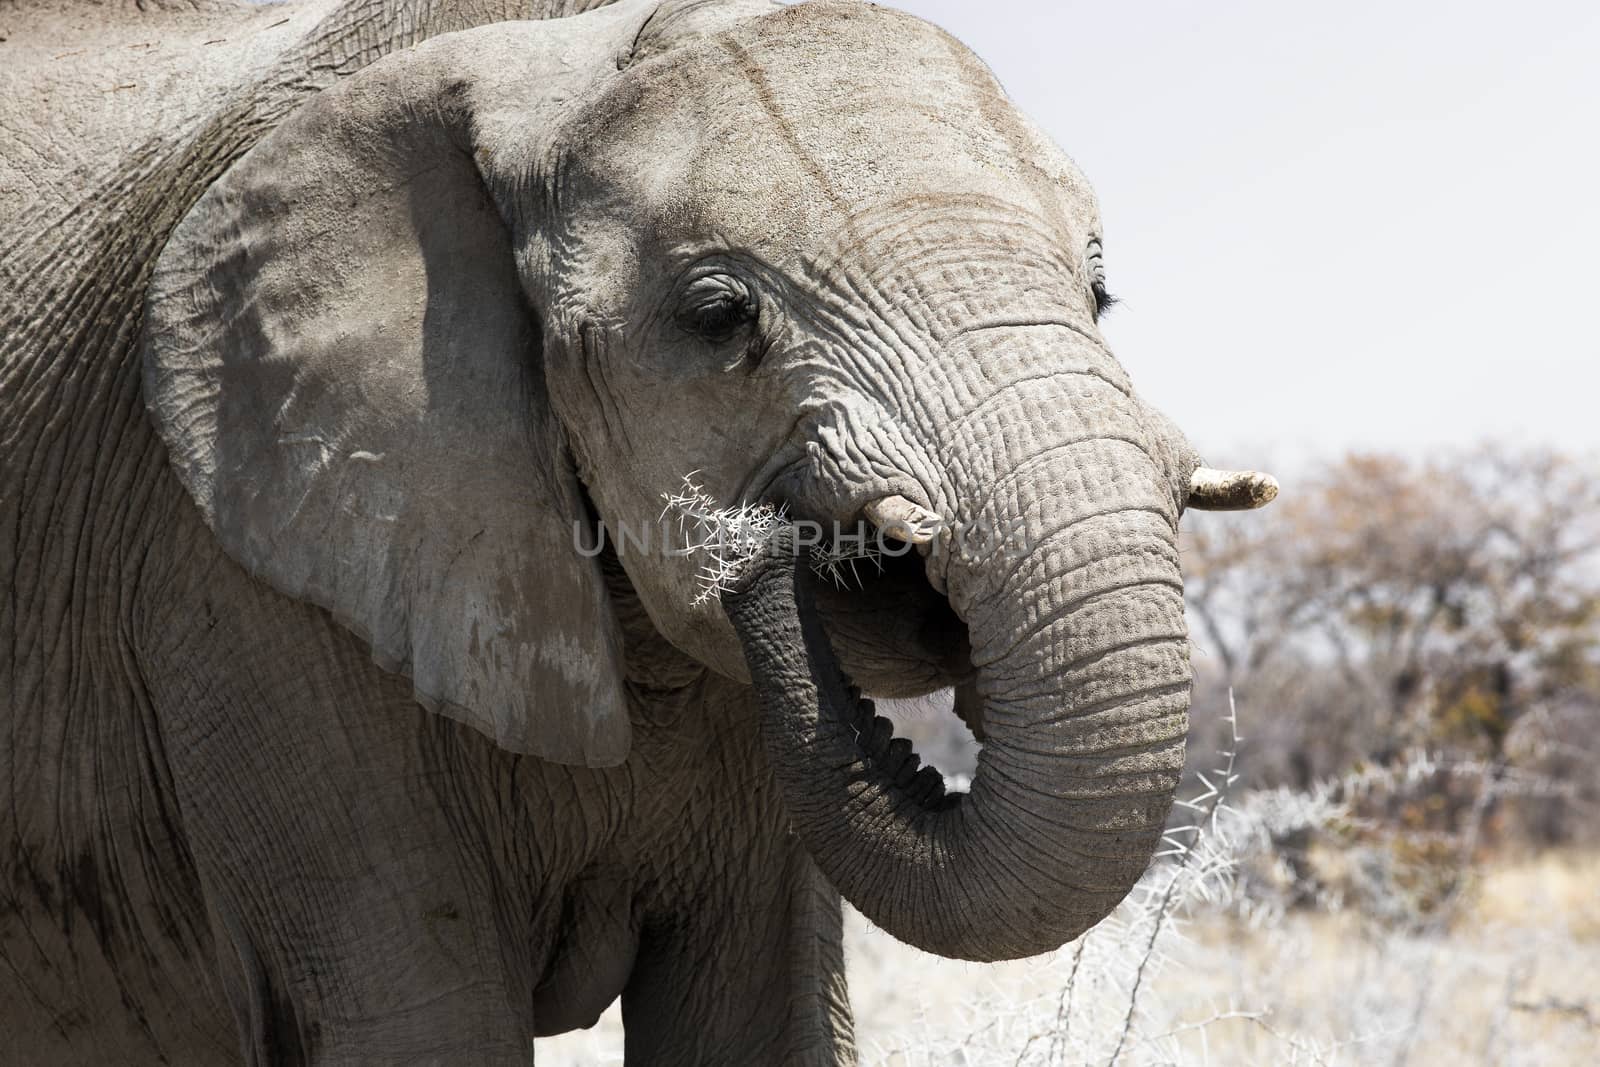 Close up of Elephant eating in the Chobe National Park, Botswana by Tjeerdkruse